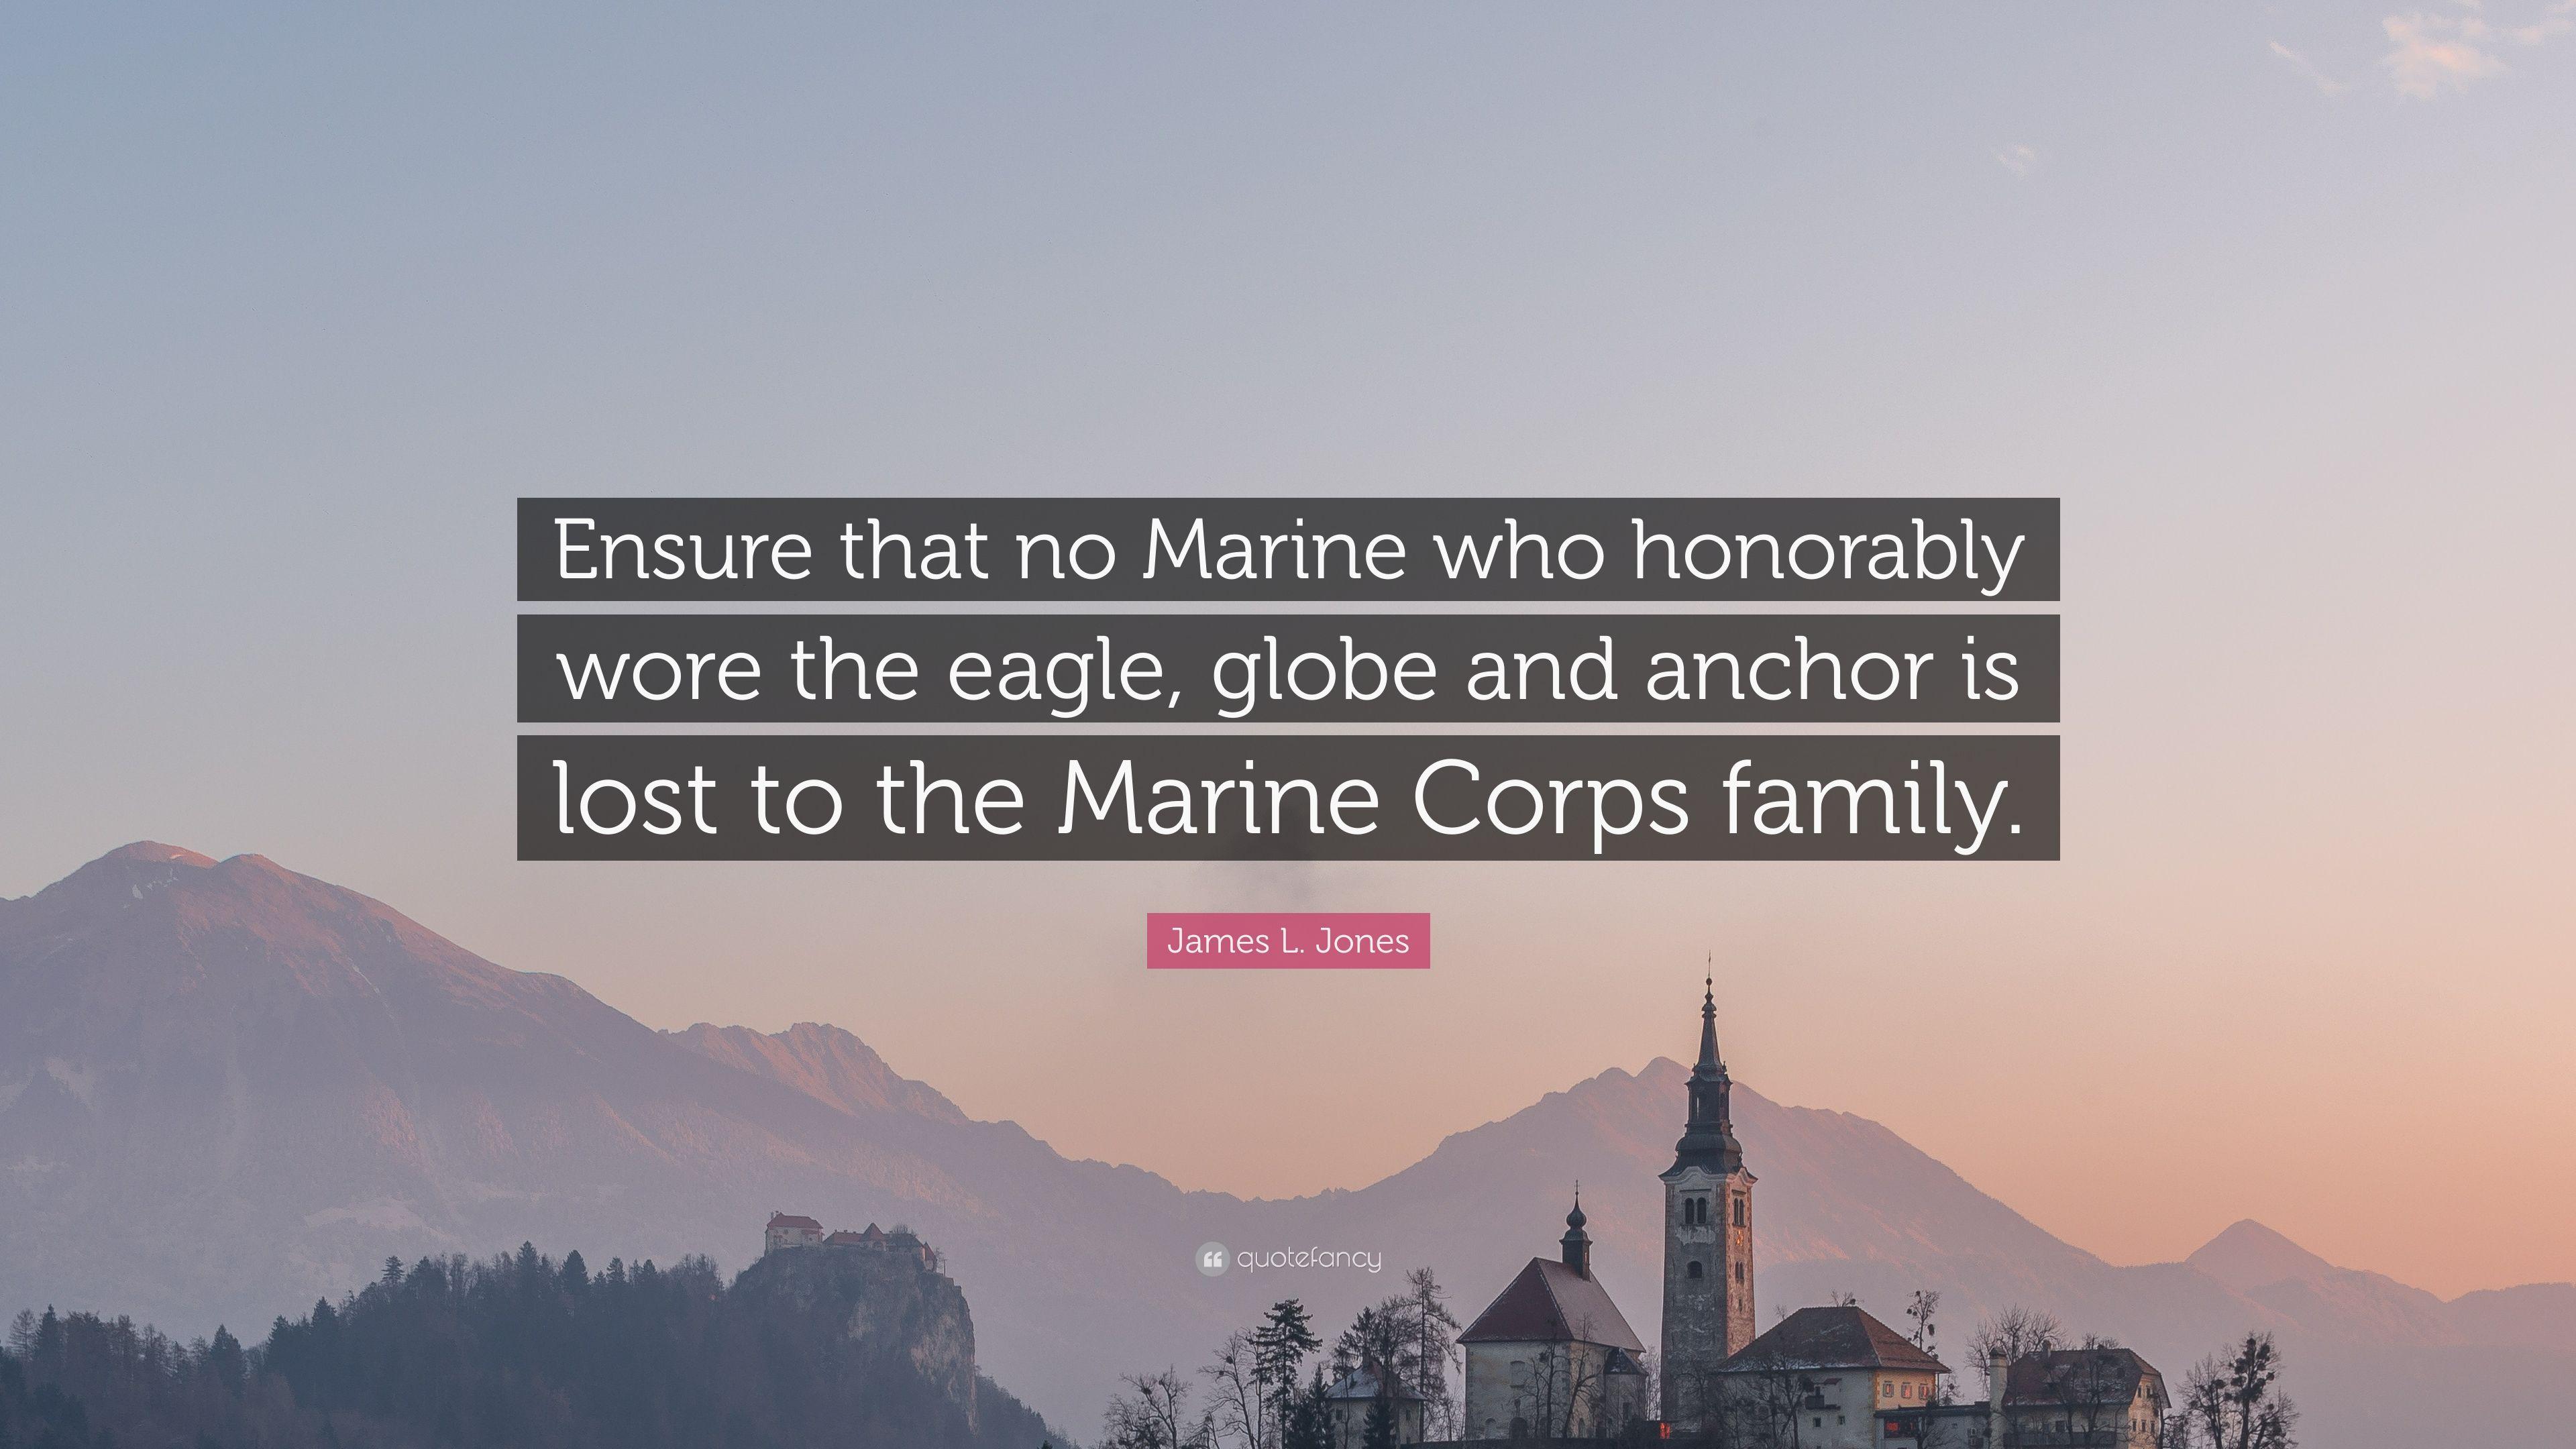 James L. Jones Quote: “Ensure that no Marine who honorably